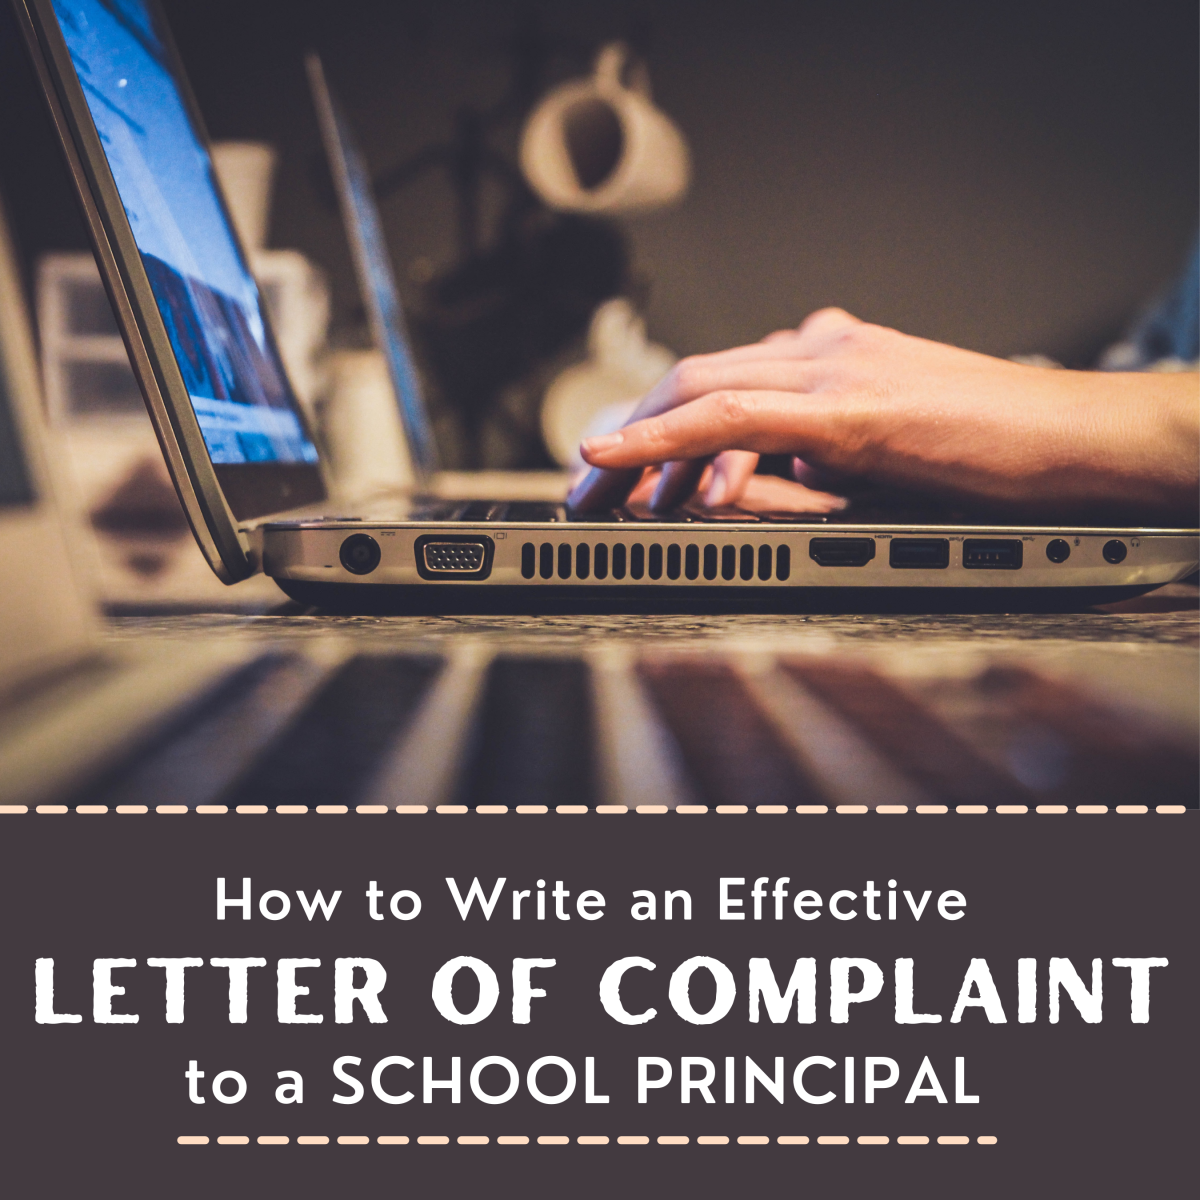 Complaint letters may be necessary to help resolve issues at your child's school.